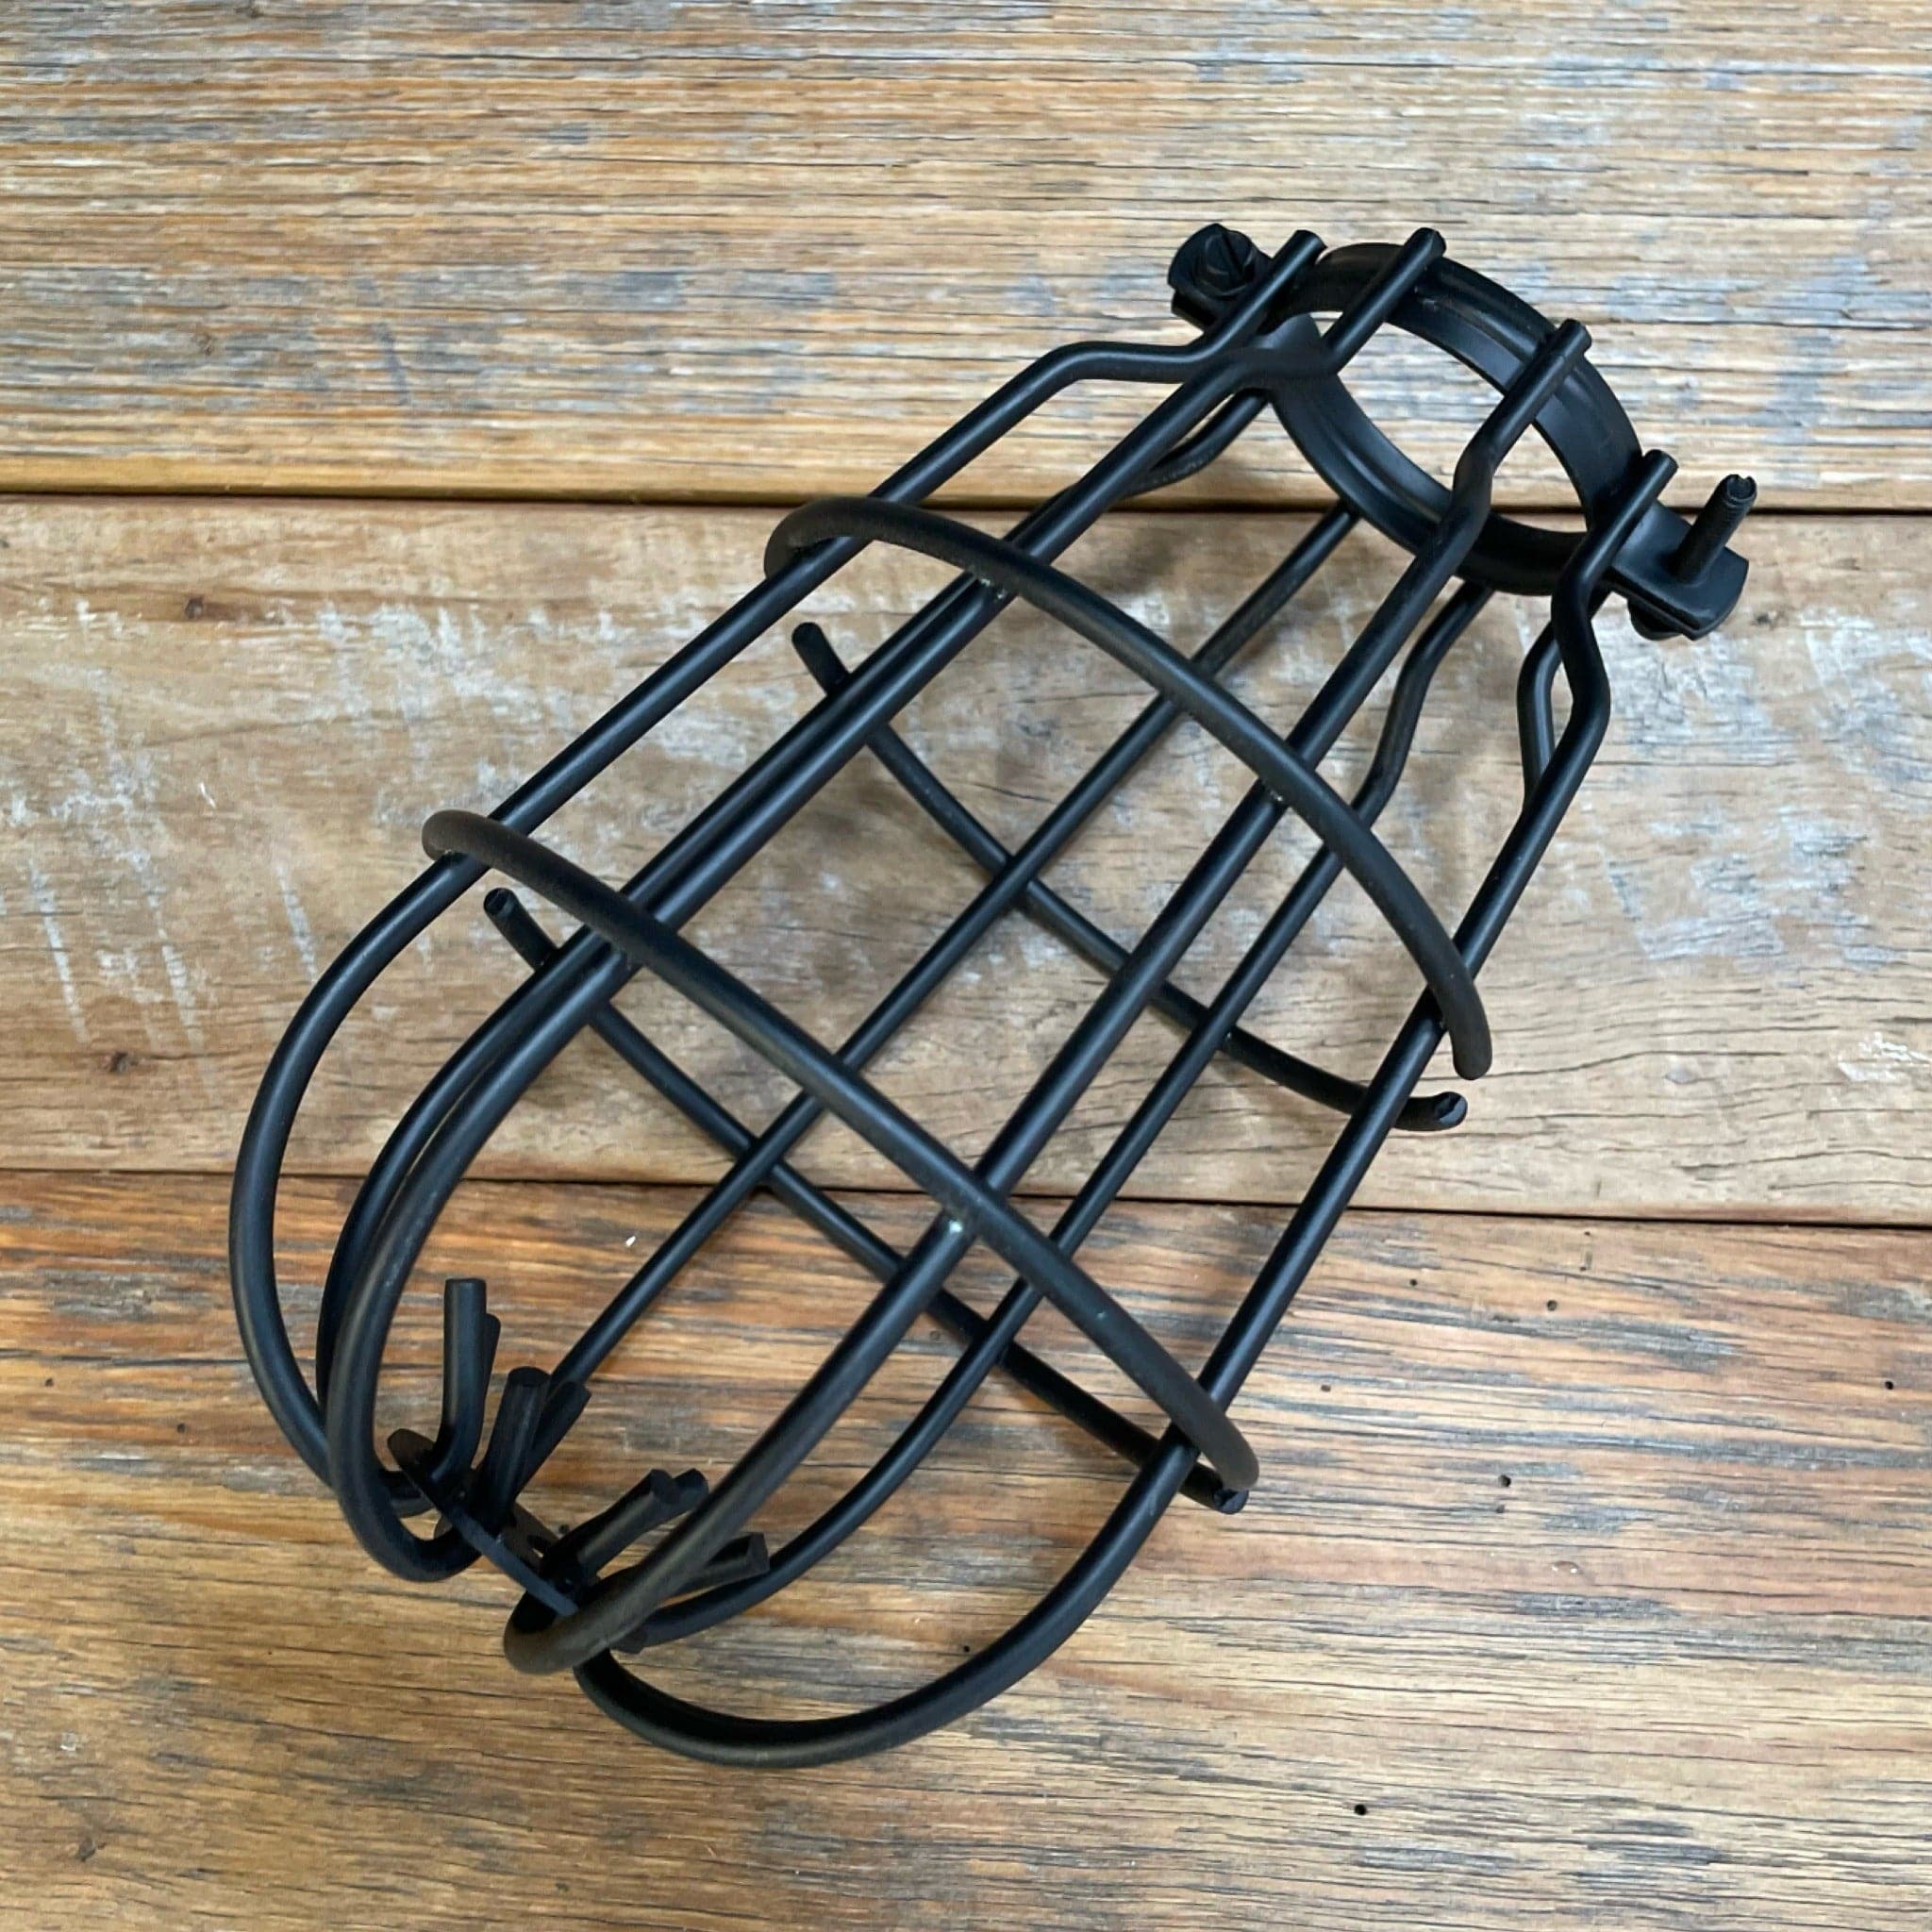 Enclosed cage light 